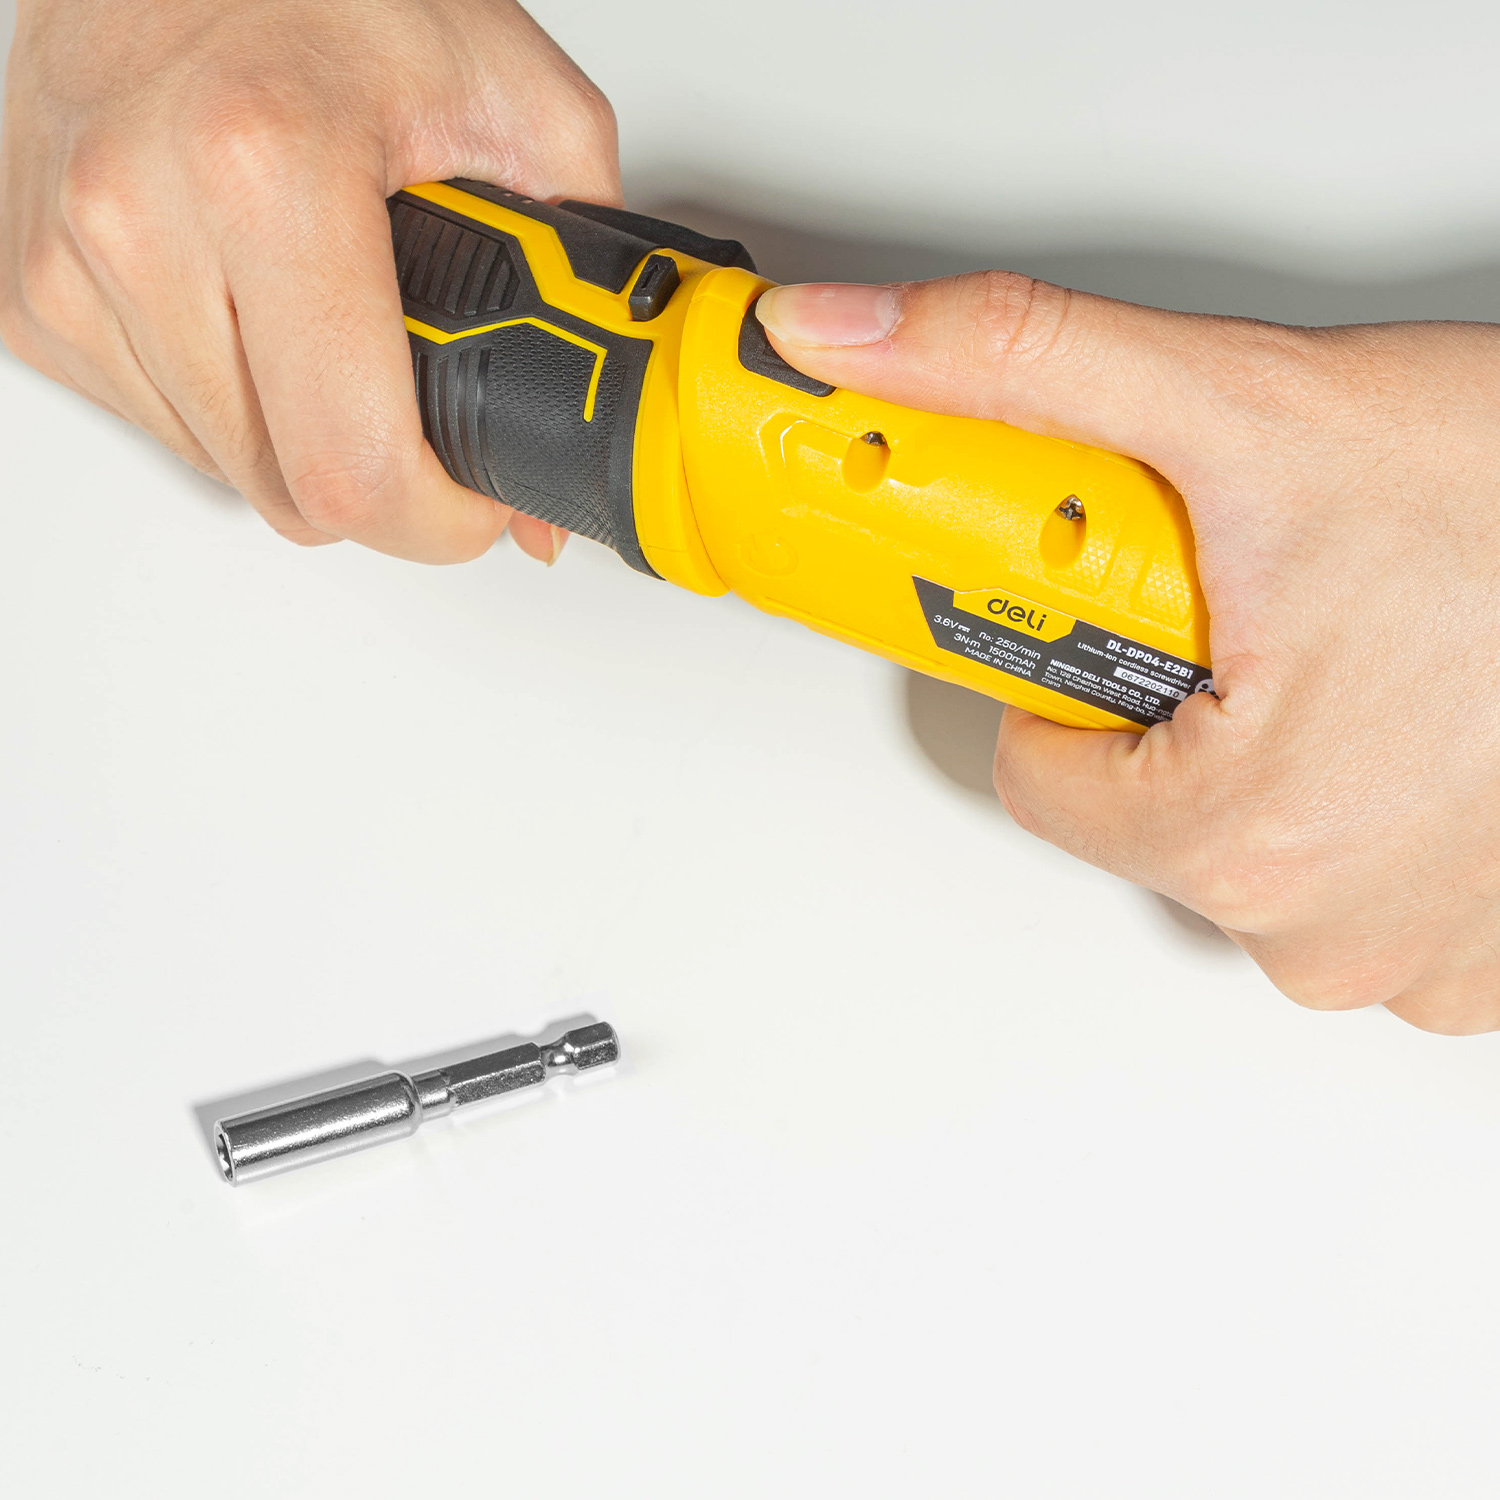 Homebase Quiet Cordless Screwdriver For Tight Spaces